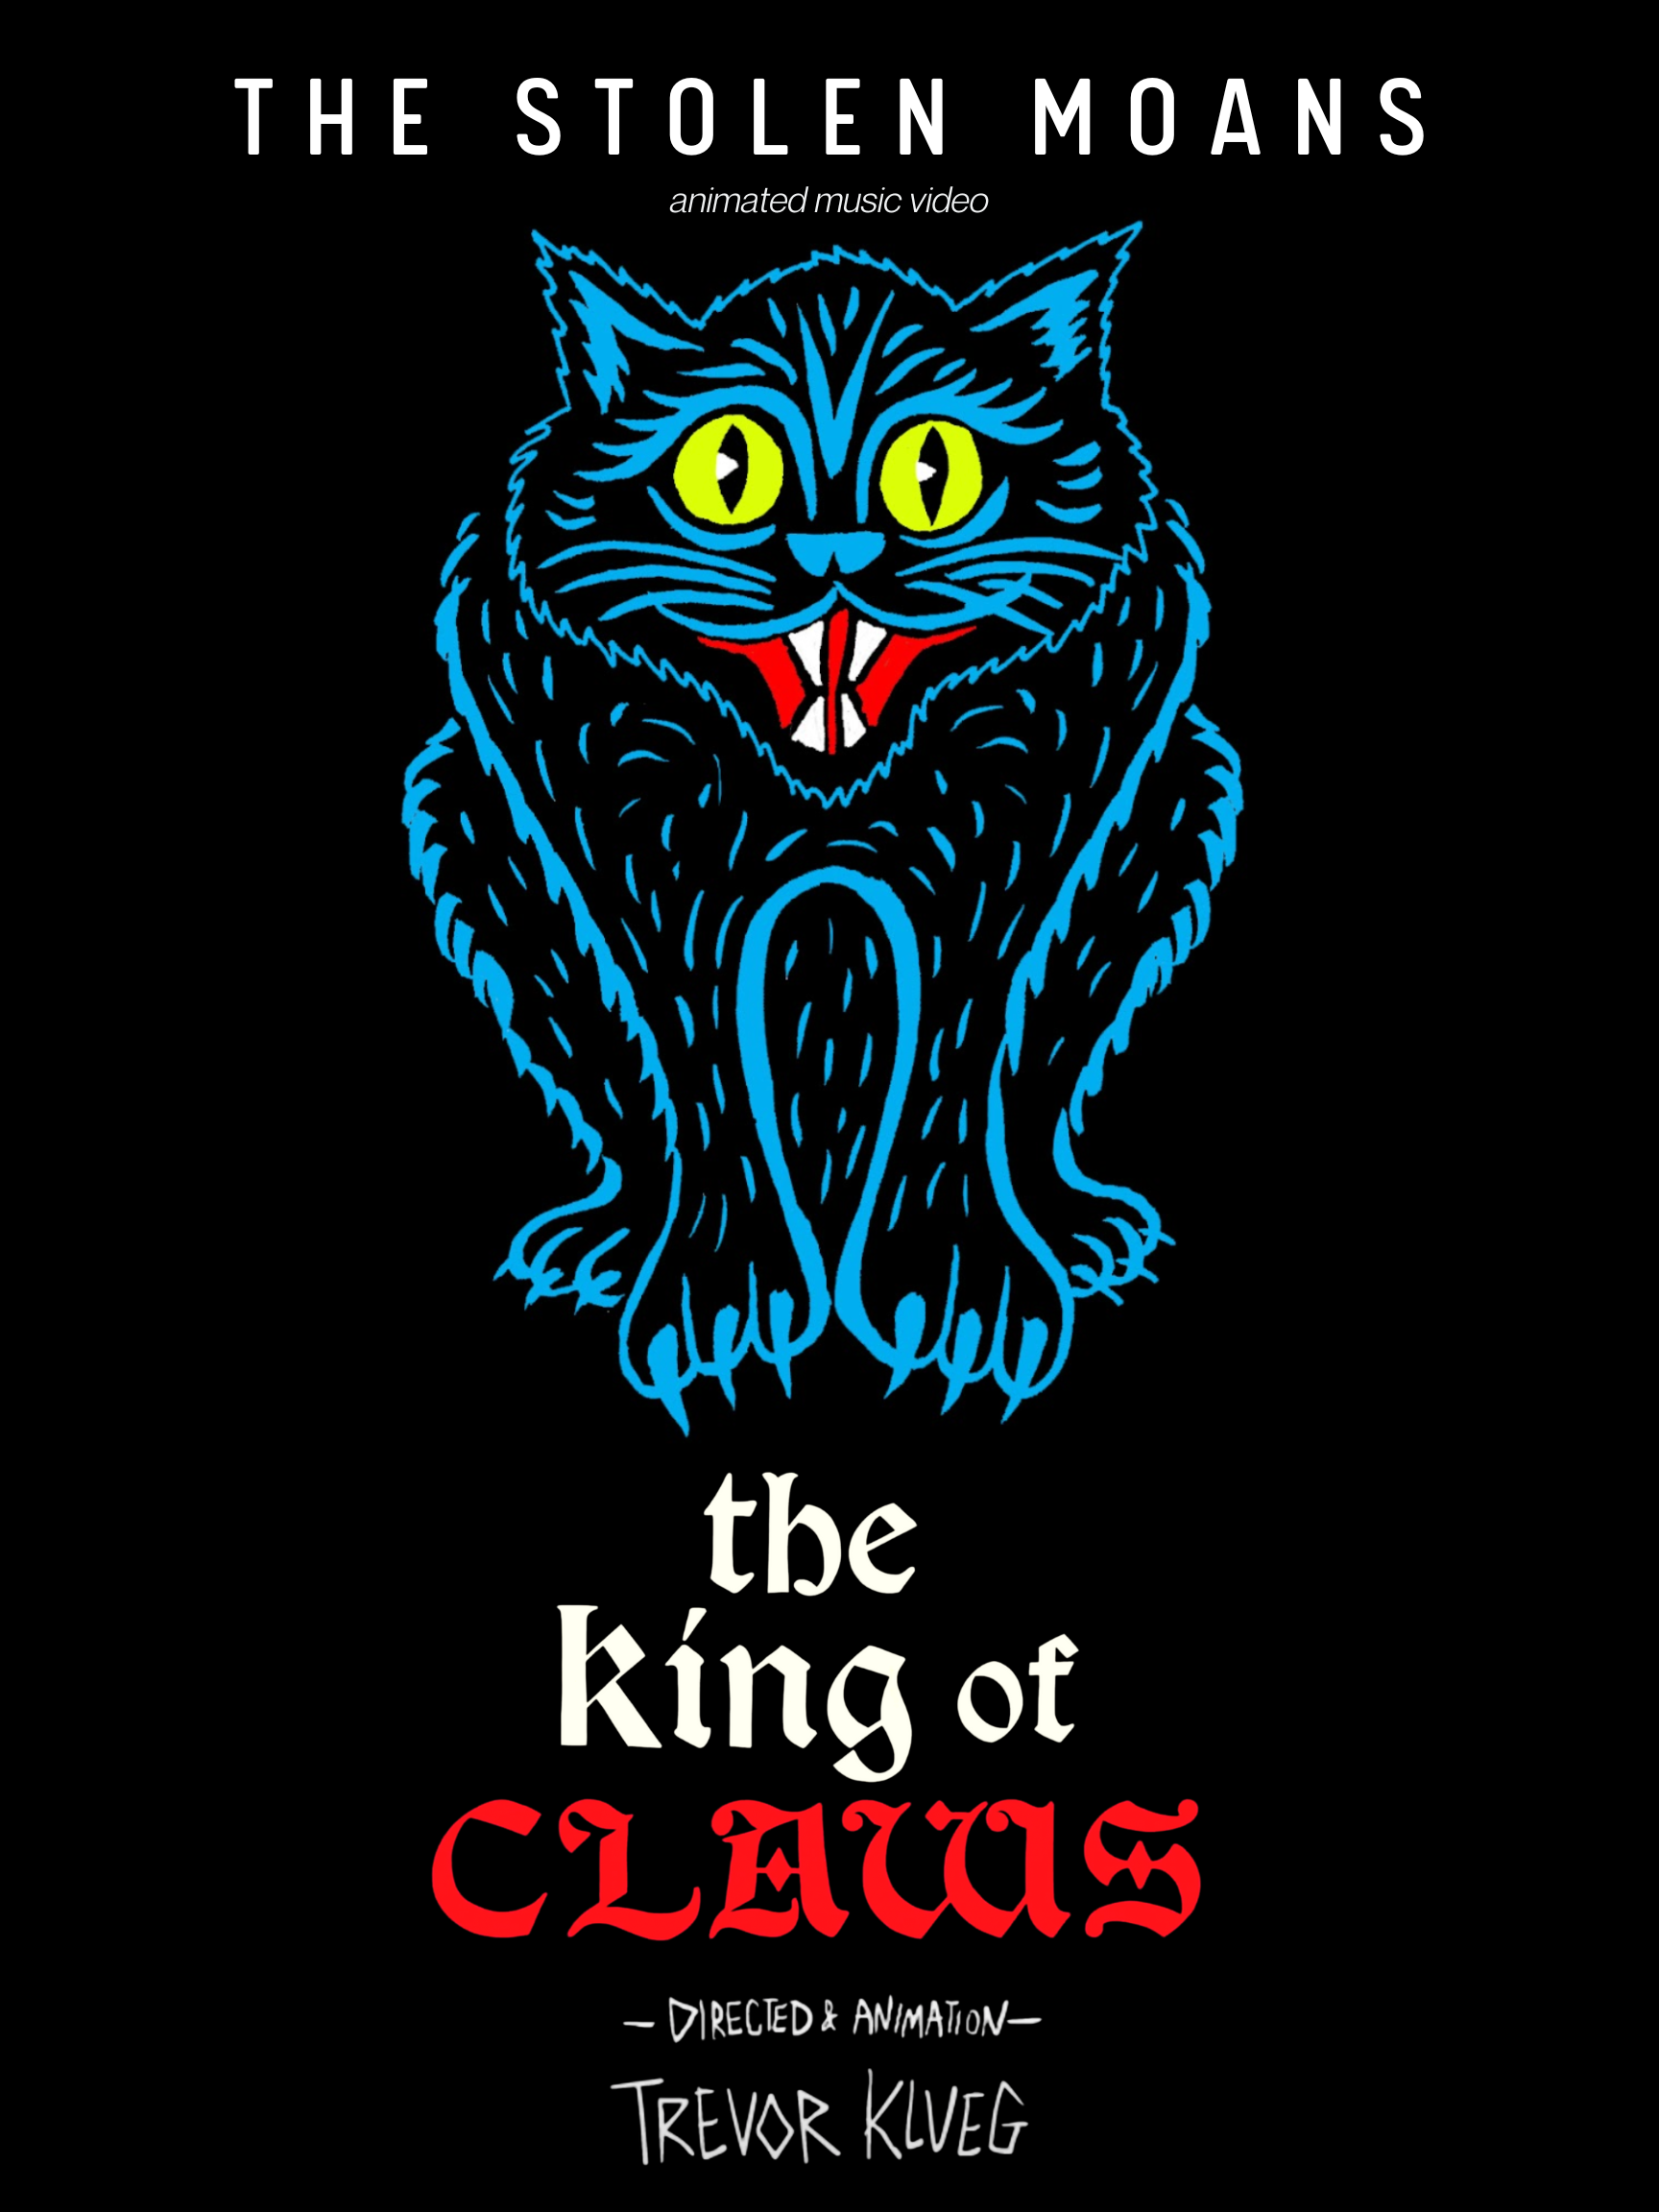 Official movie poster (variant) for the award winning The King of Claws animated music video by The Stolen Moans